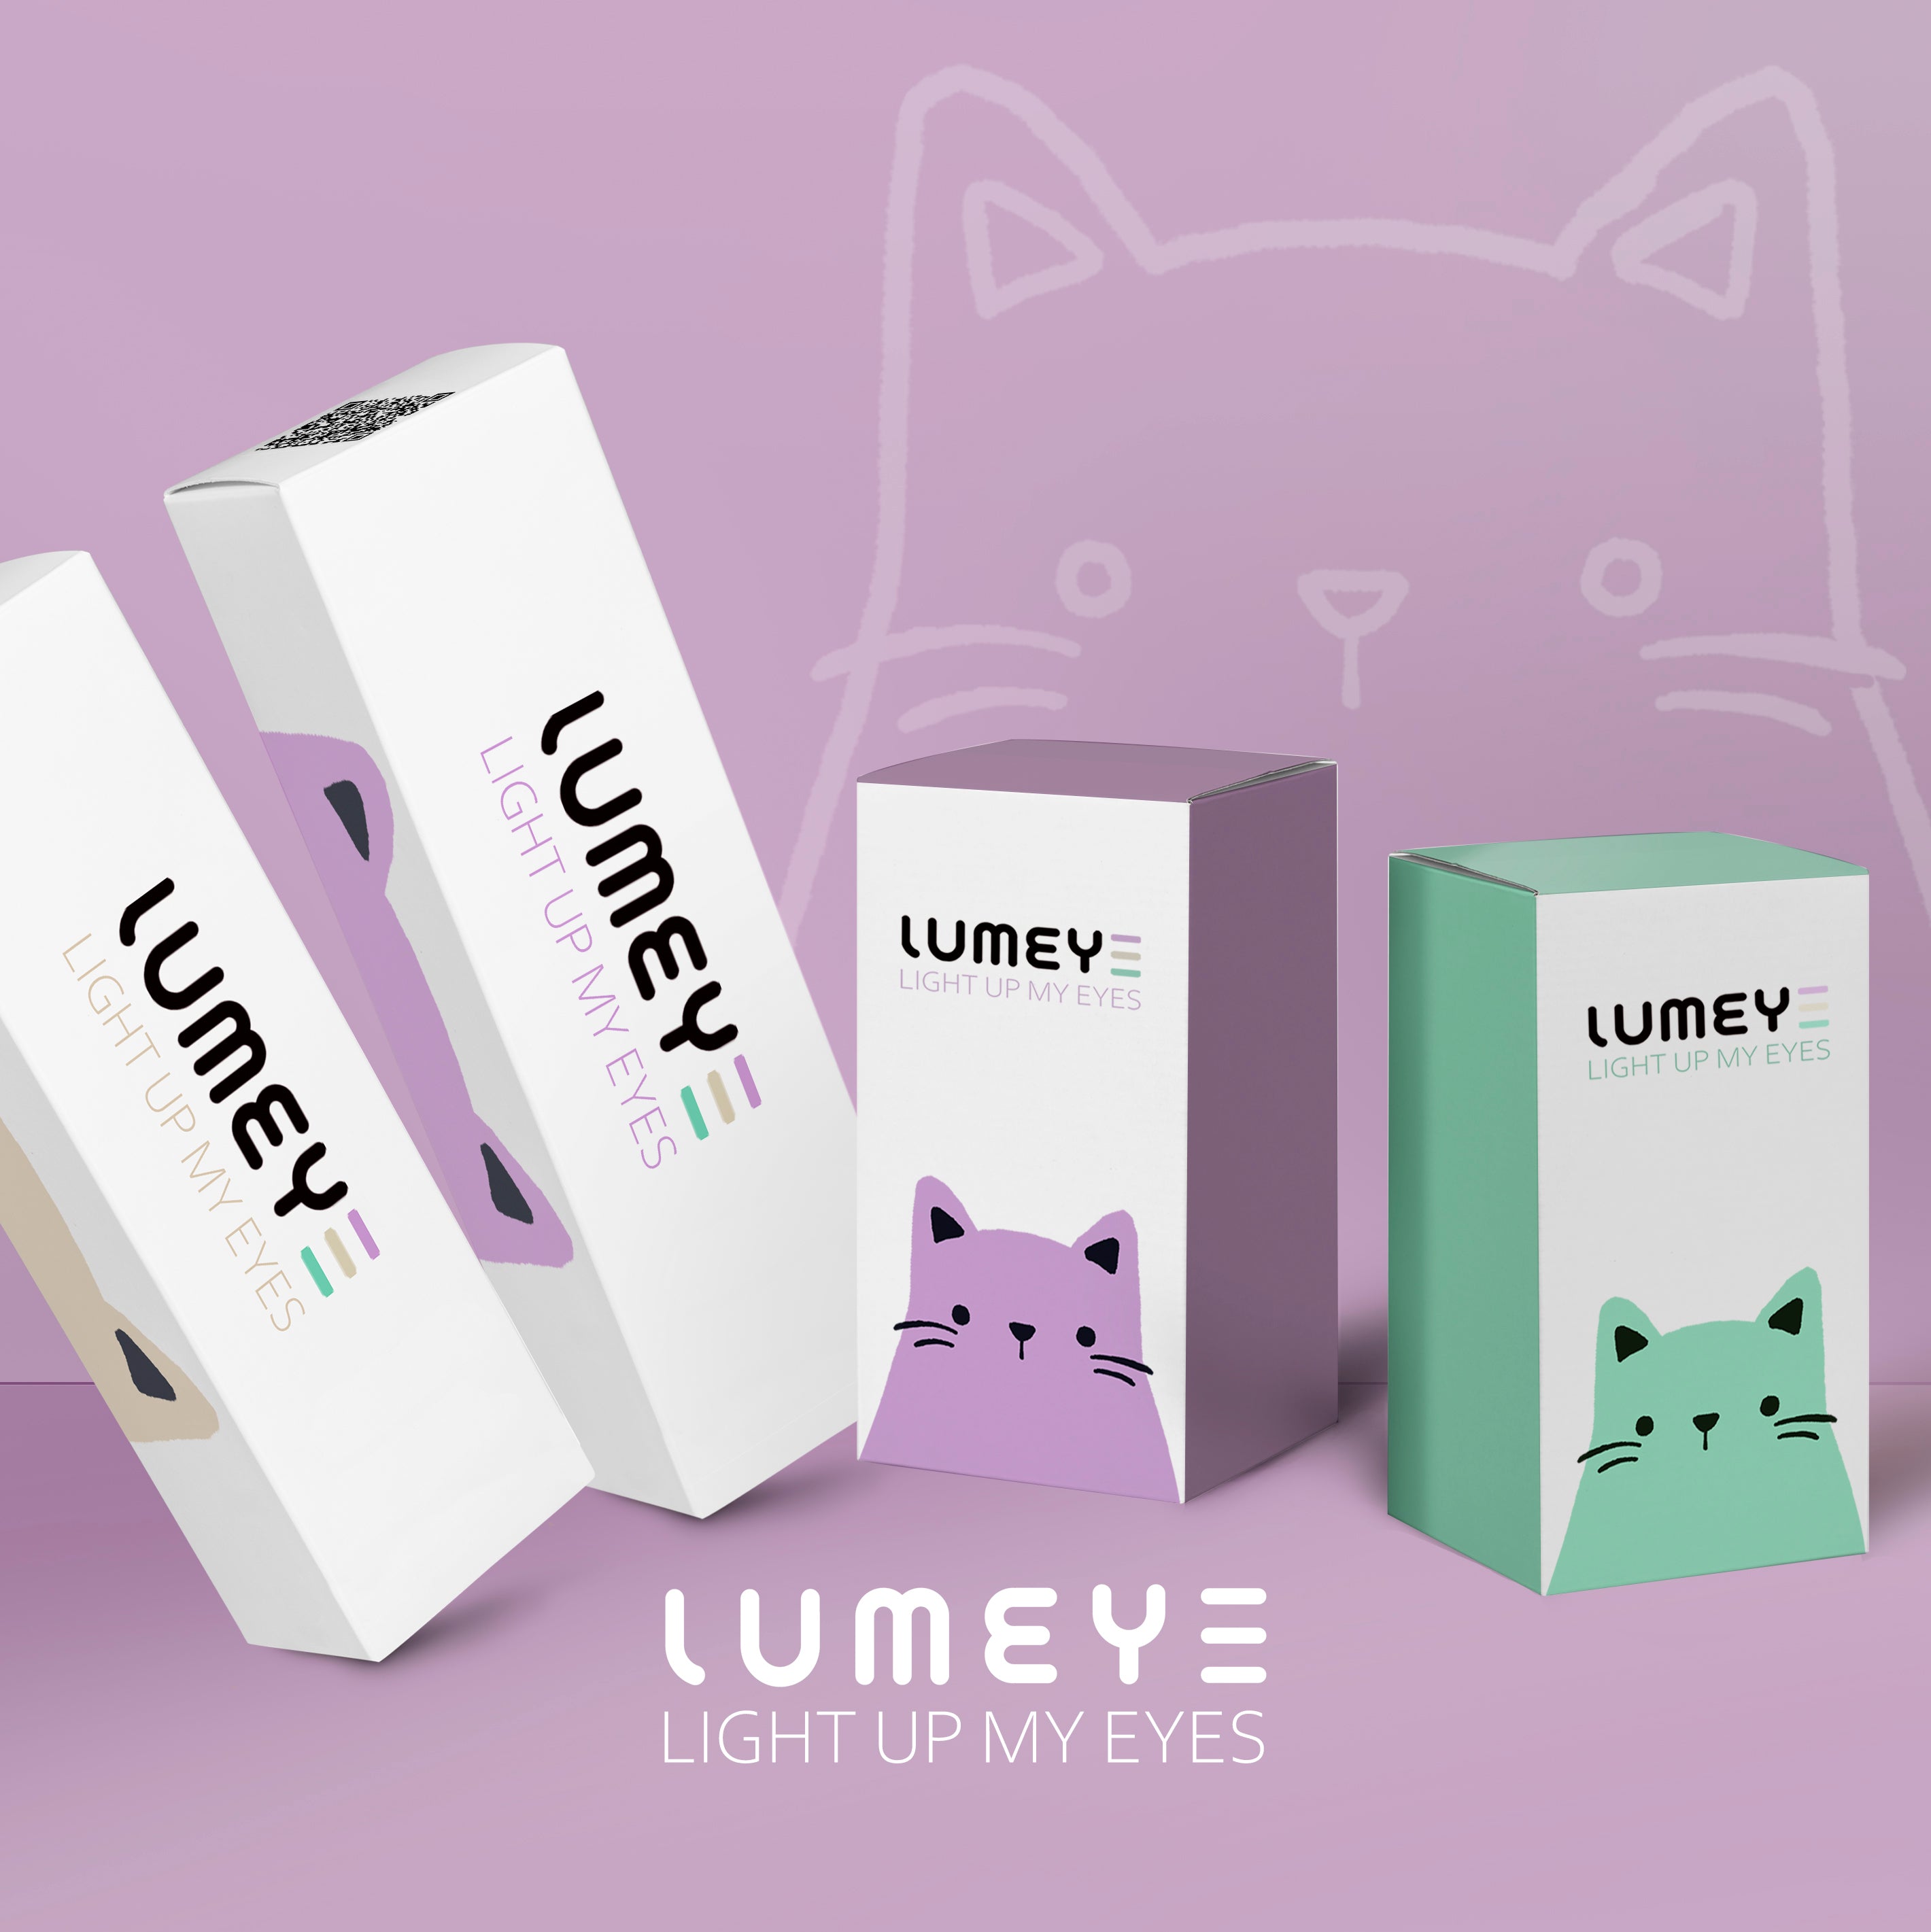 Best COLORED CONTACTS - LUMEYE Cheese Blue Colored Contact Lenses - LUMEYE